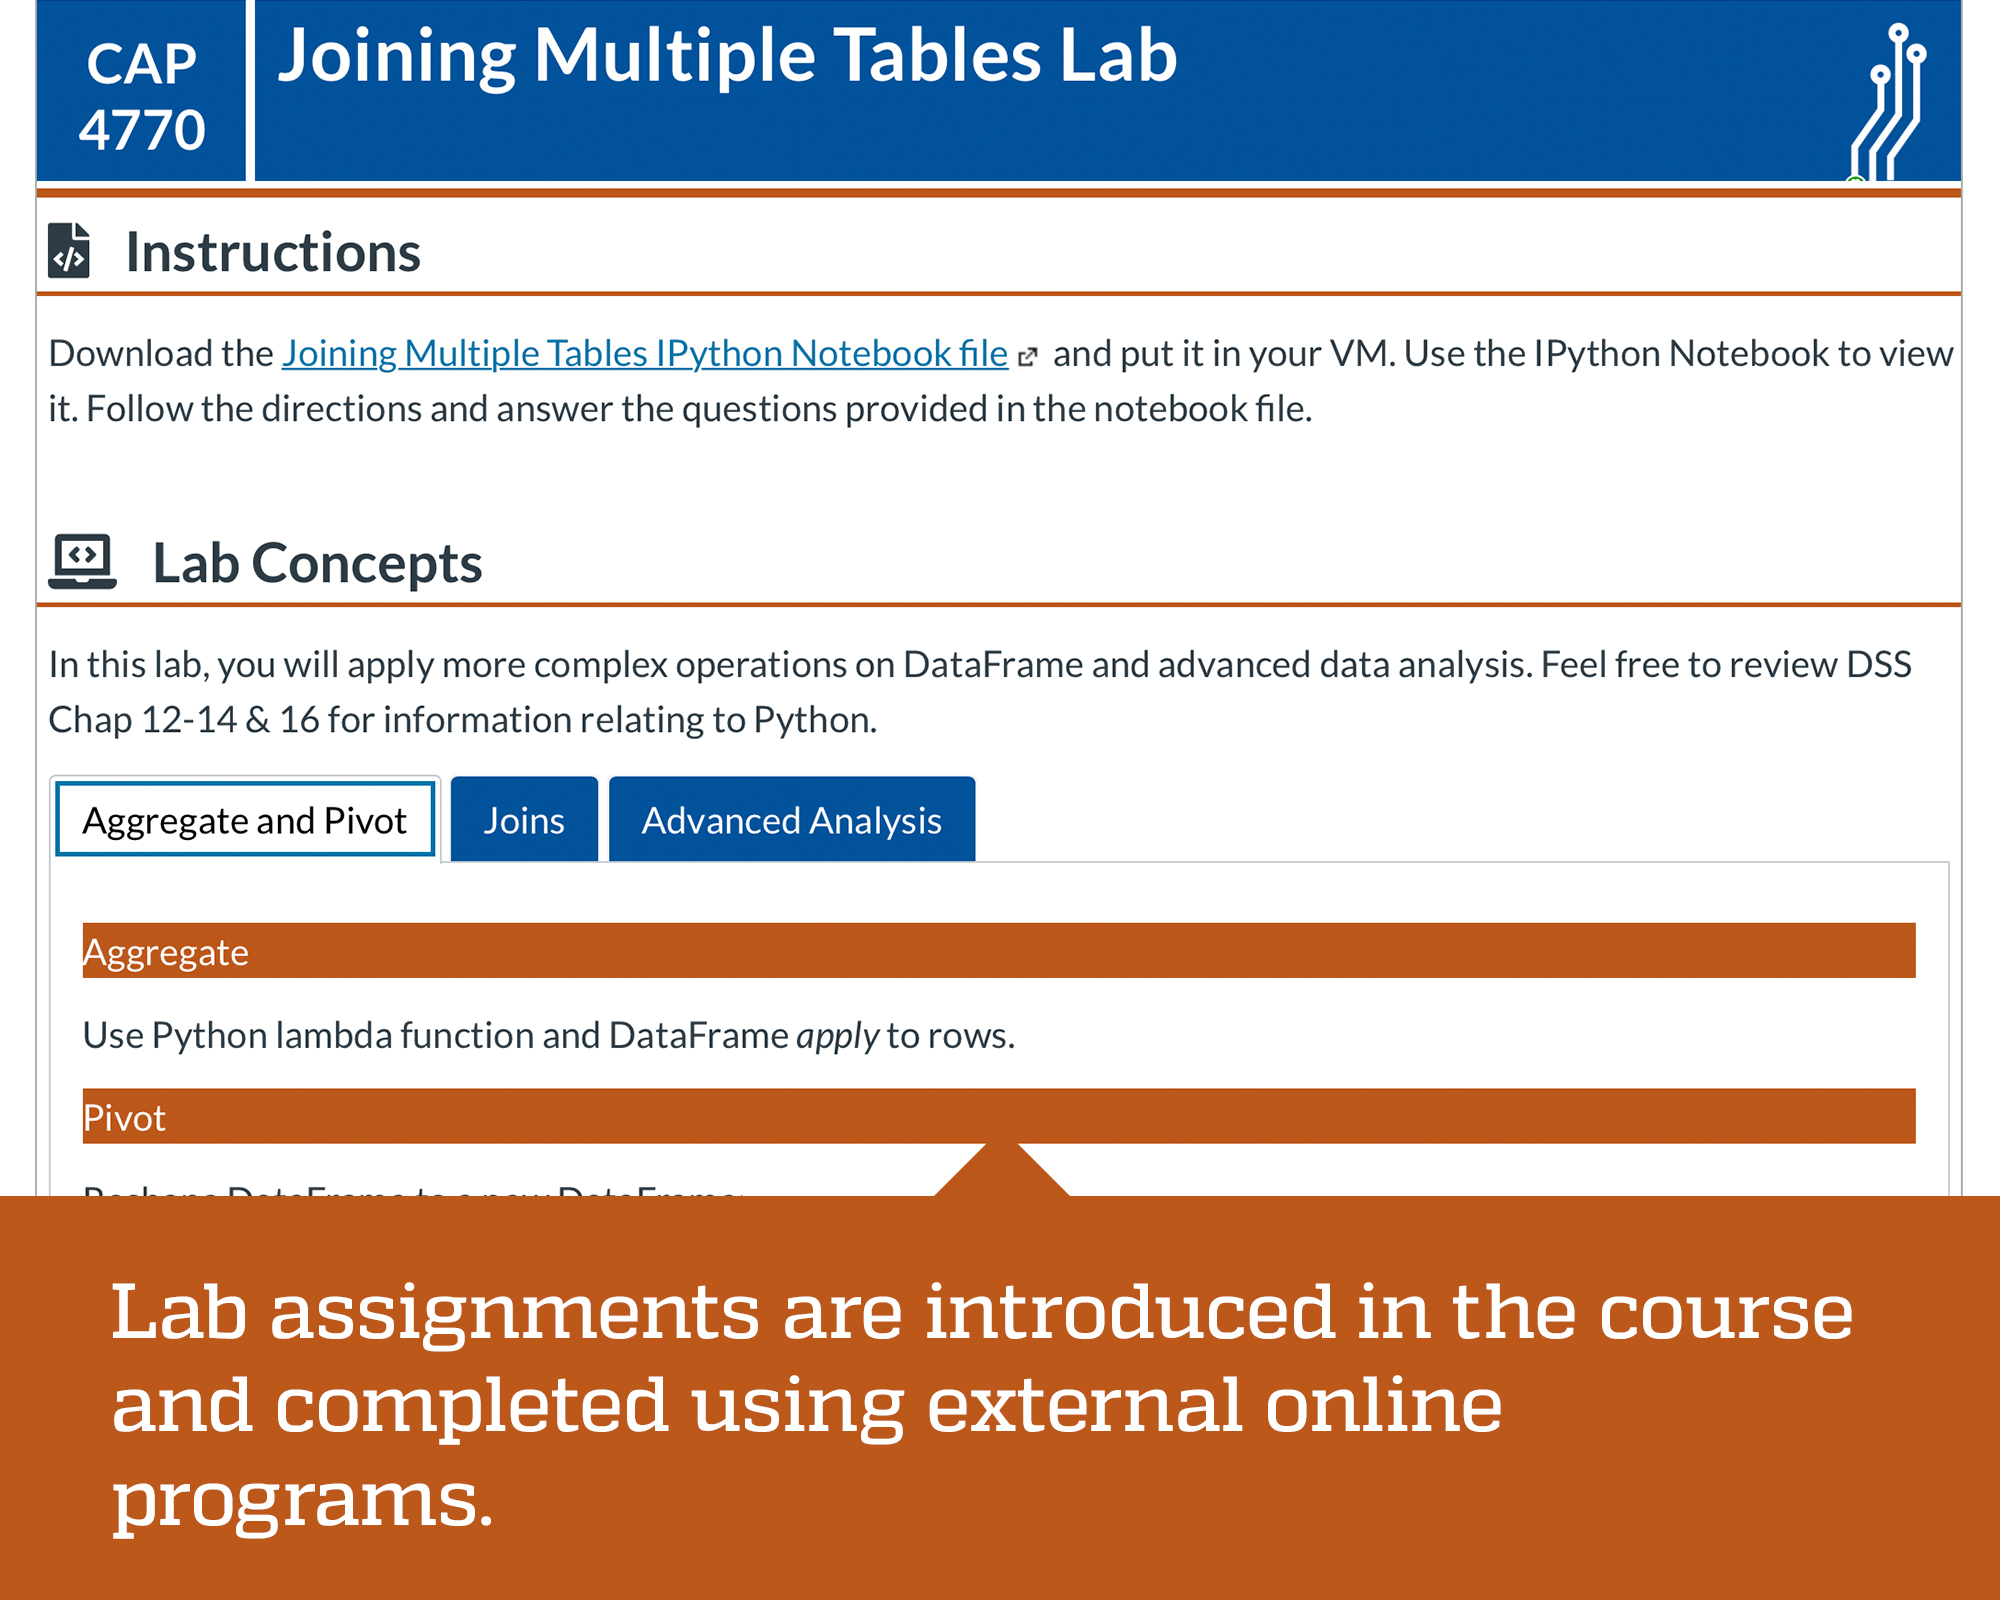 Course lab assignment page designed by Center for Online Innovation and Production at University of Florida